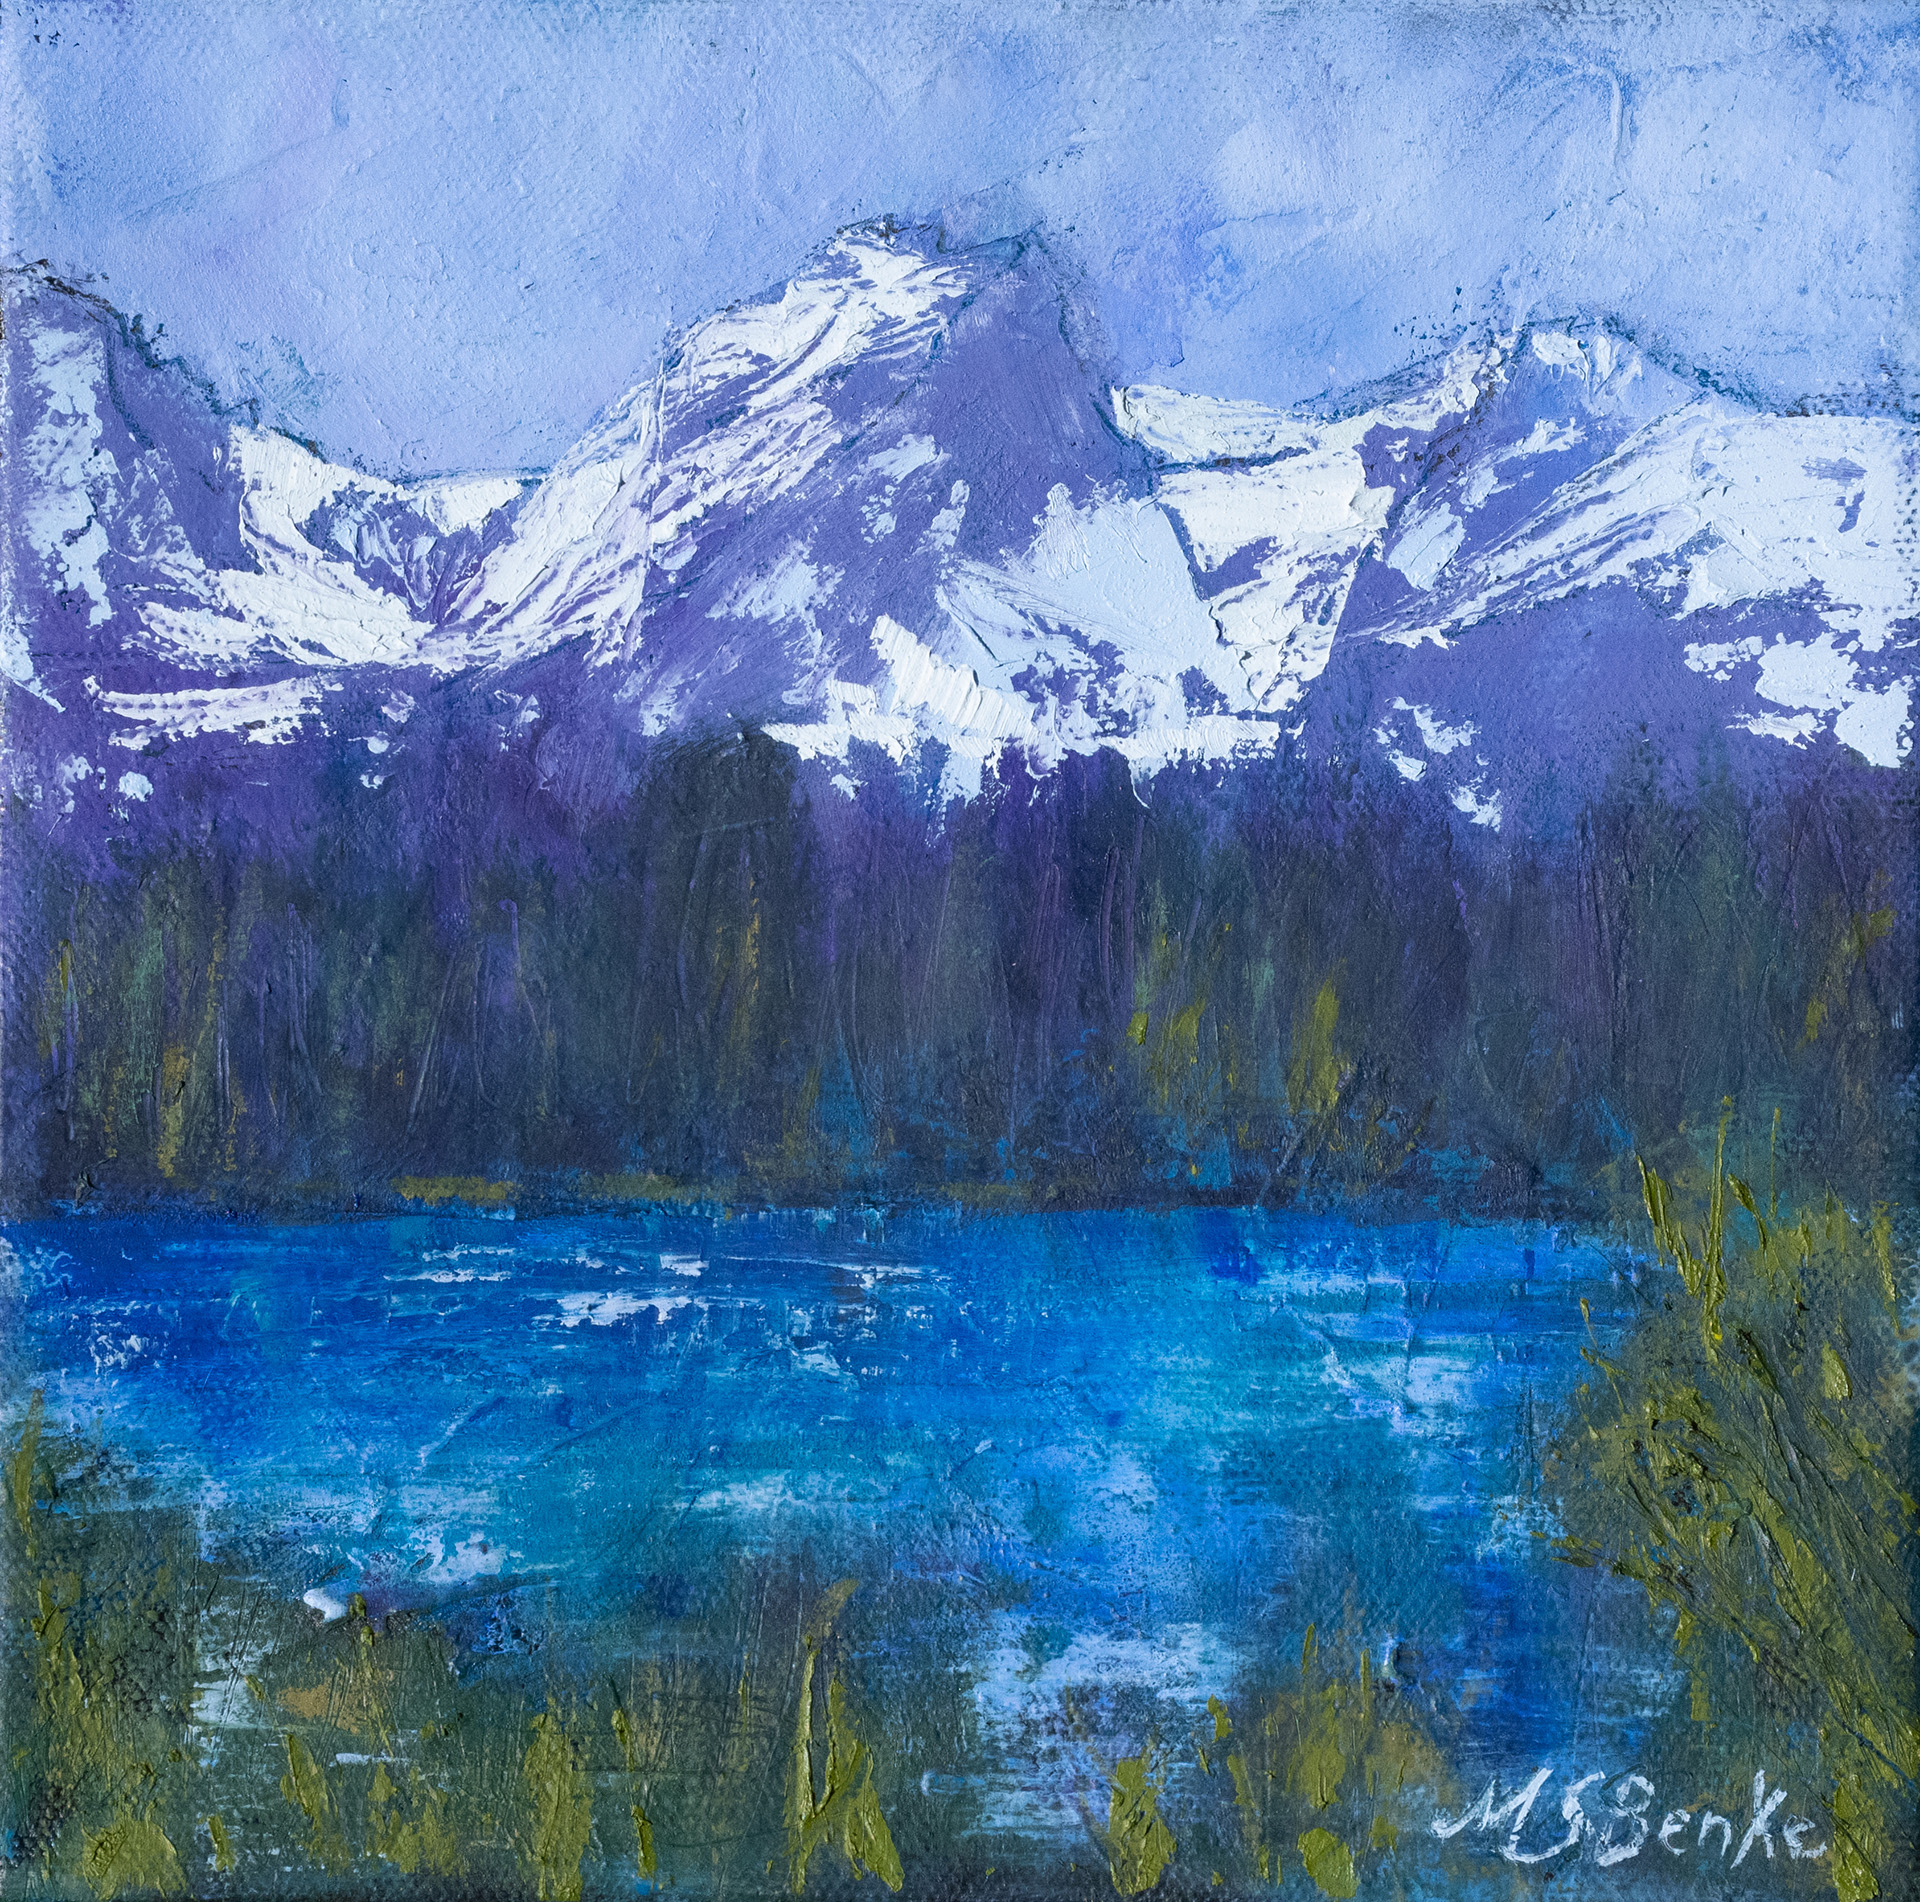 Snow-covered Hallett Peak soars over a peaceful lake in this square oil painting created in harmonic blues. lavenders, and greens by Mary Benke